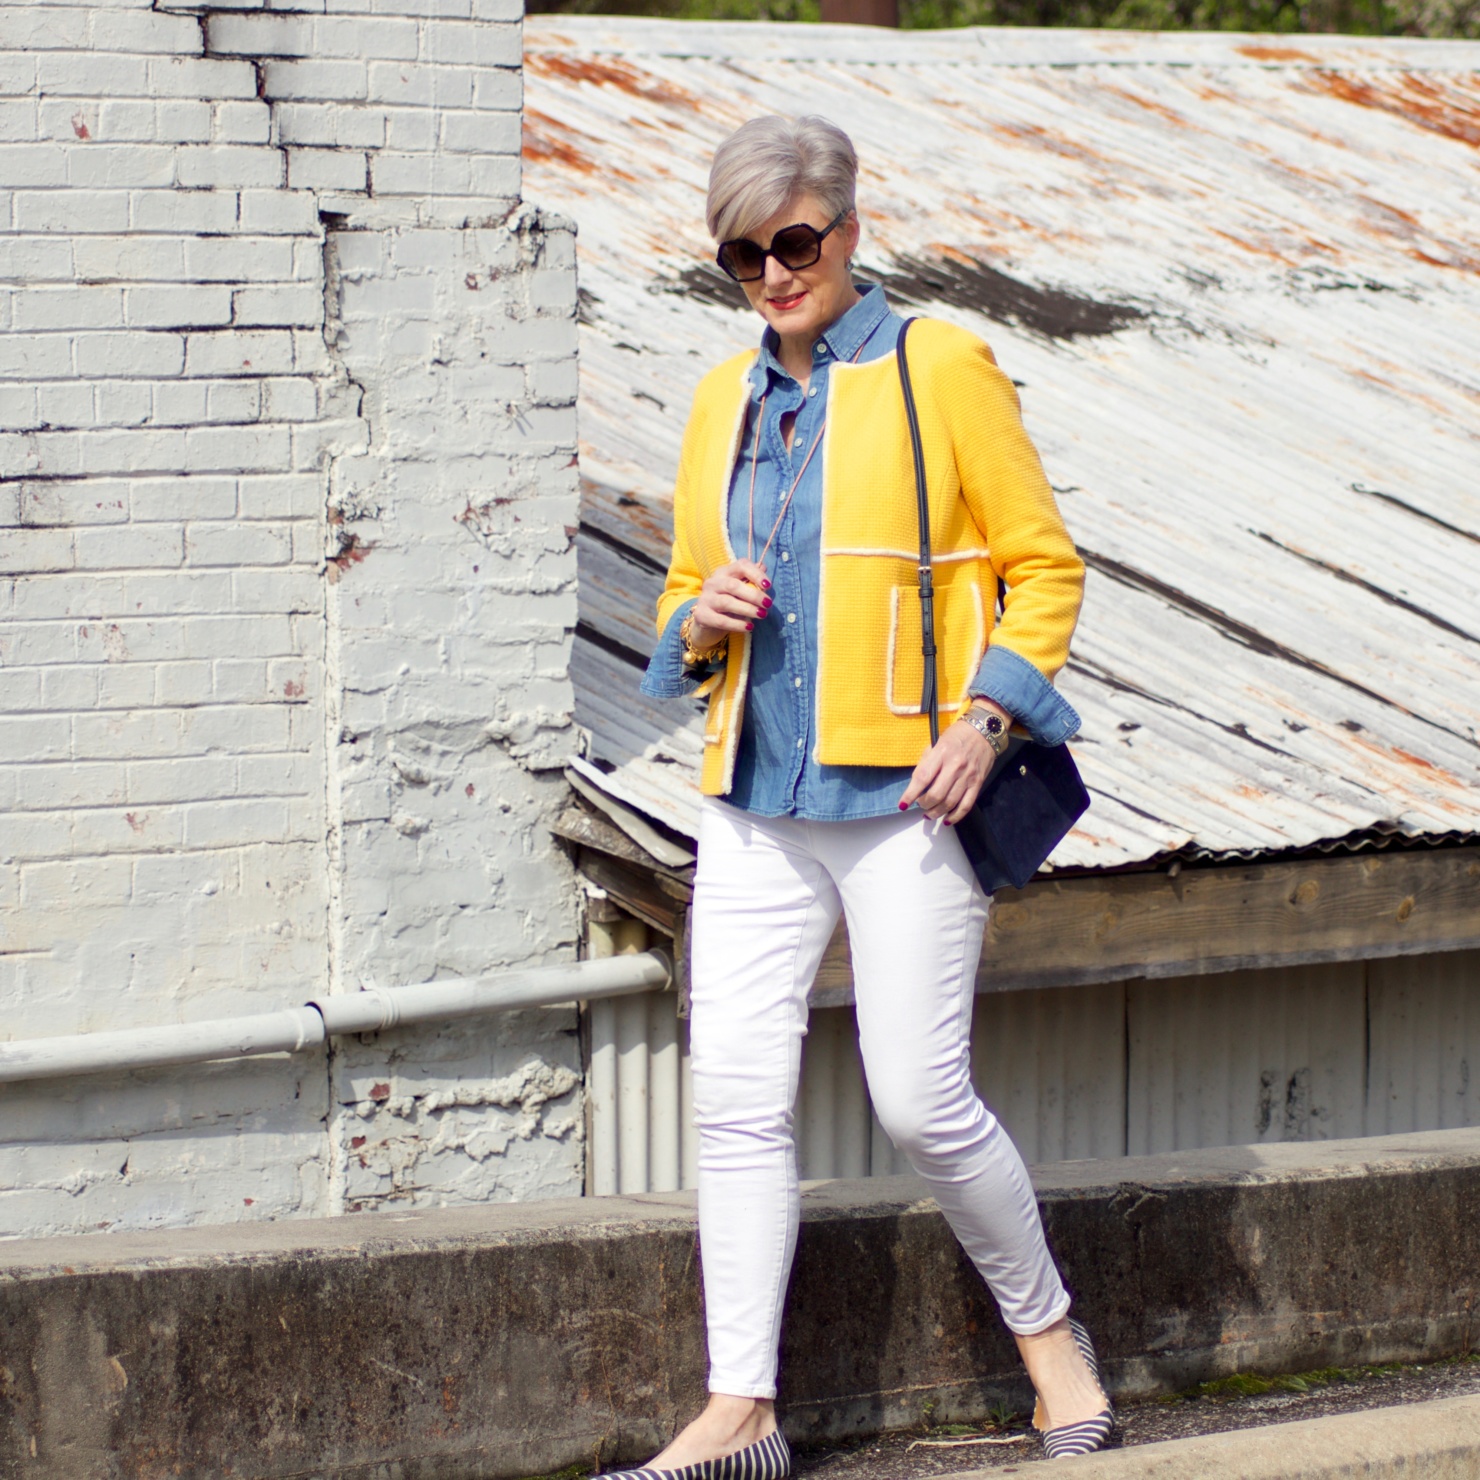 beth from Style at a Certain Age wears a Boden yellow blazer, chambray shirt, white denim and striped shoes